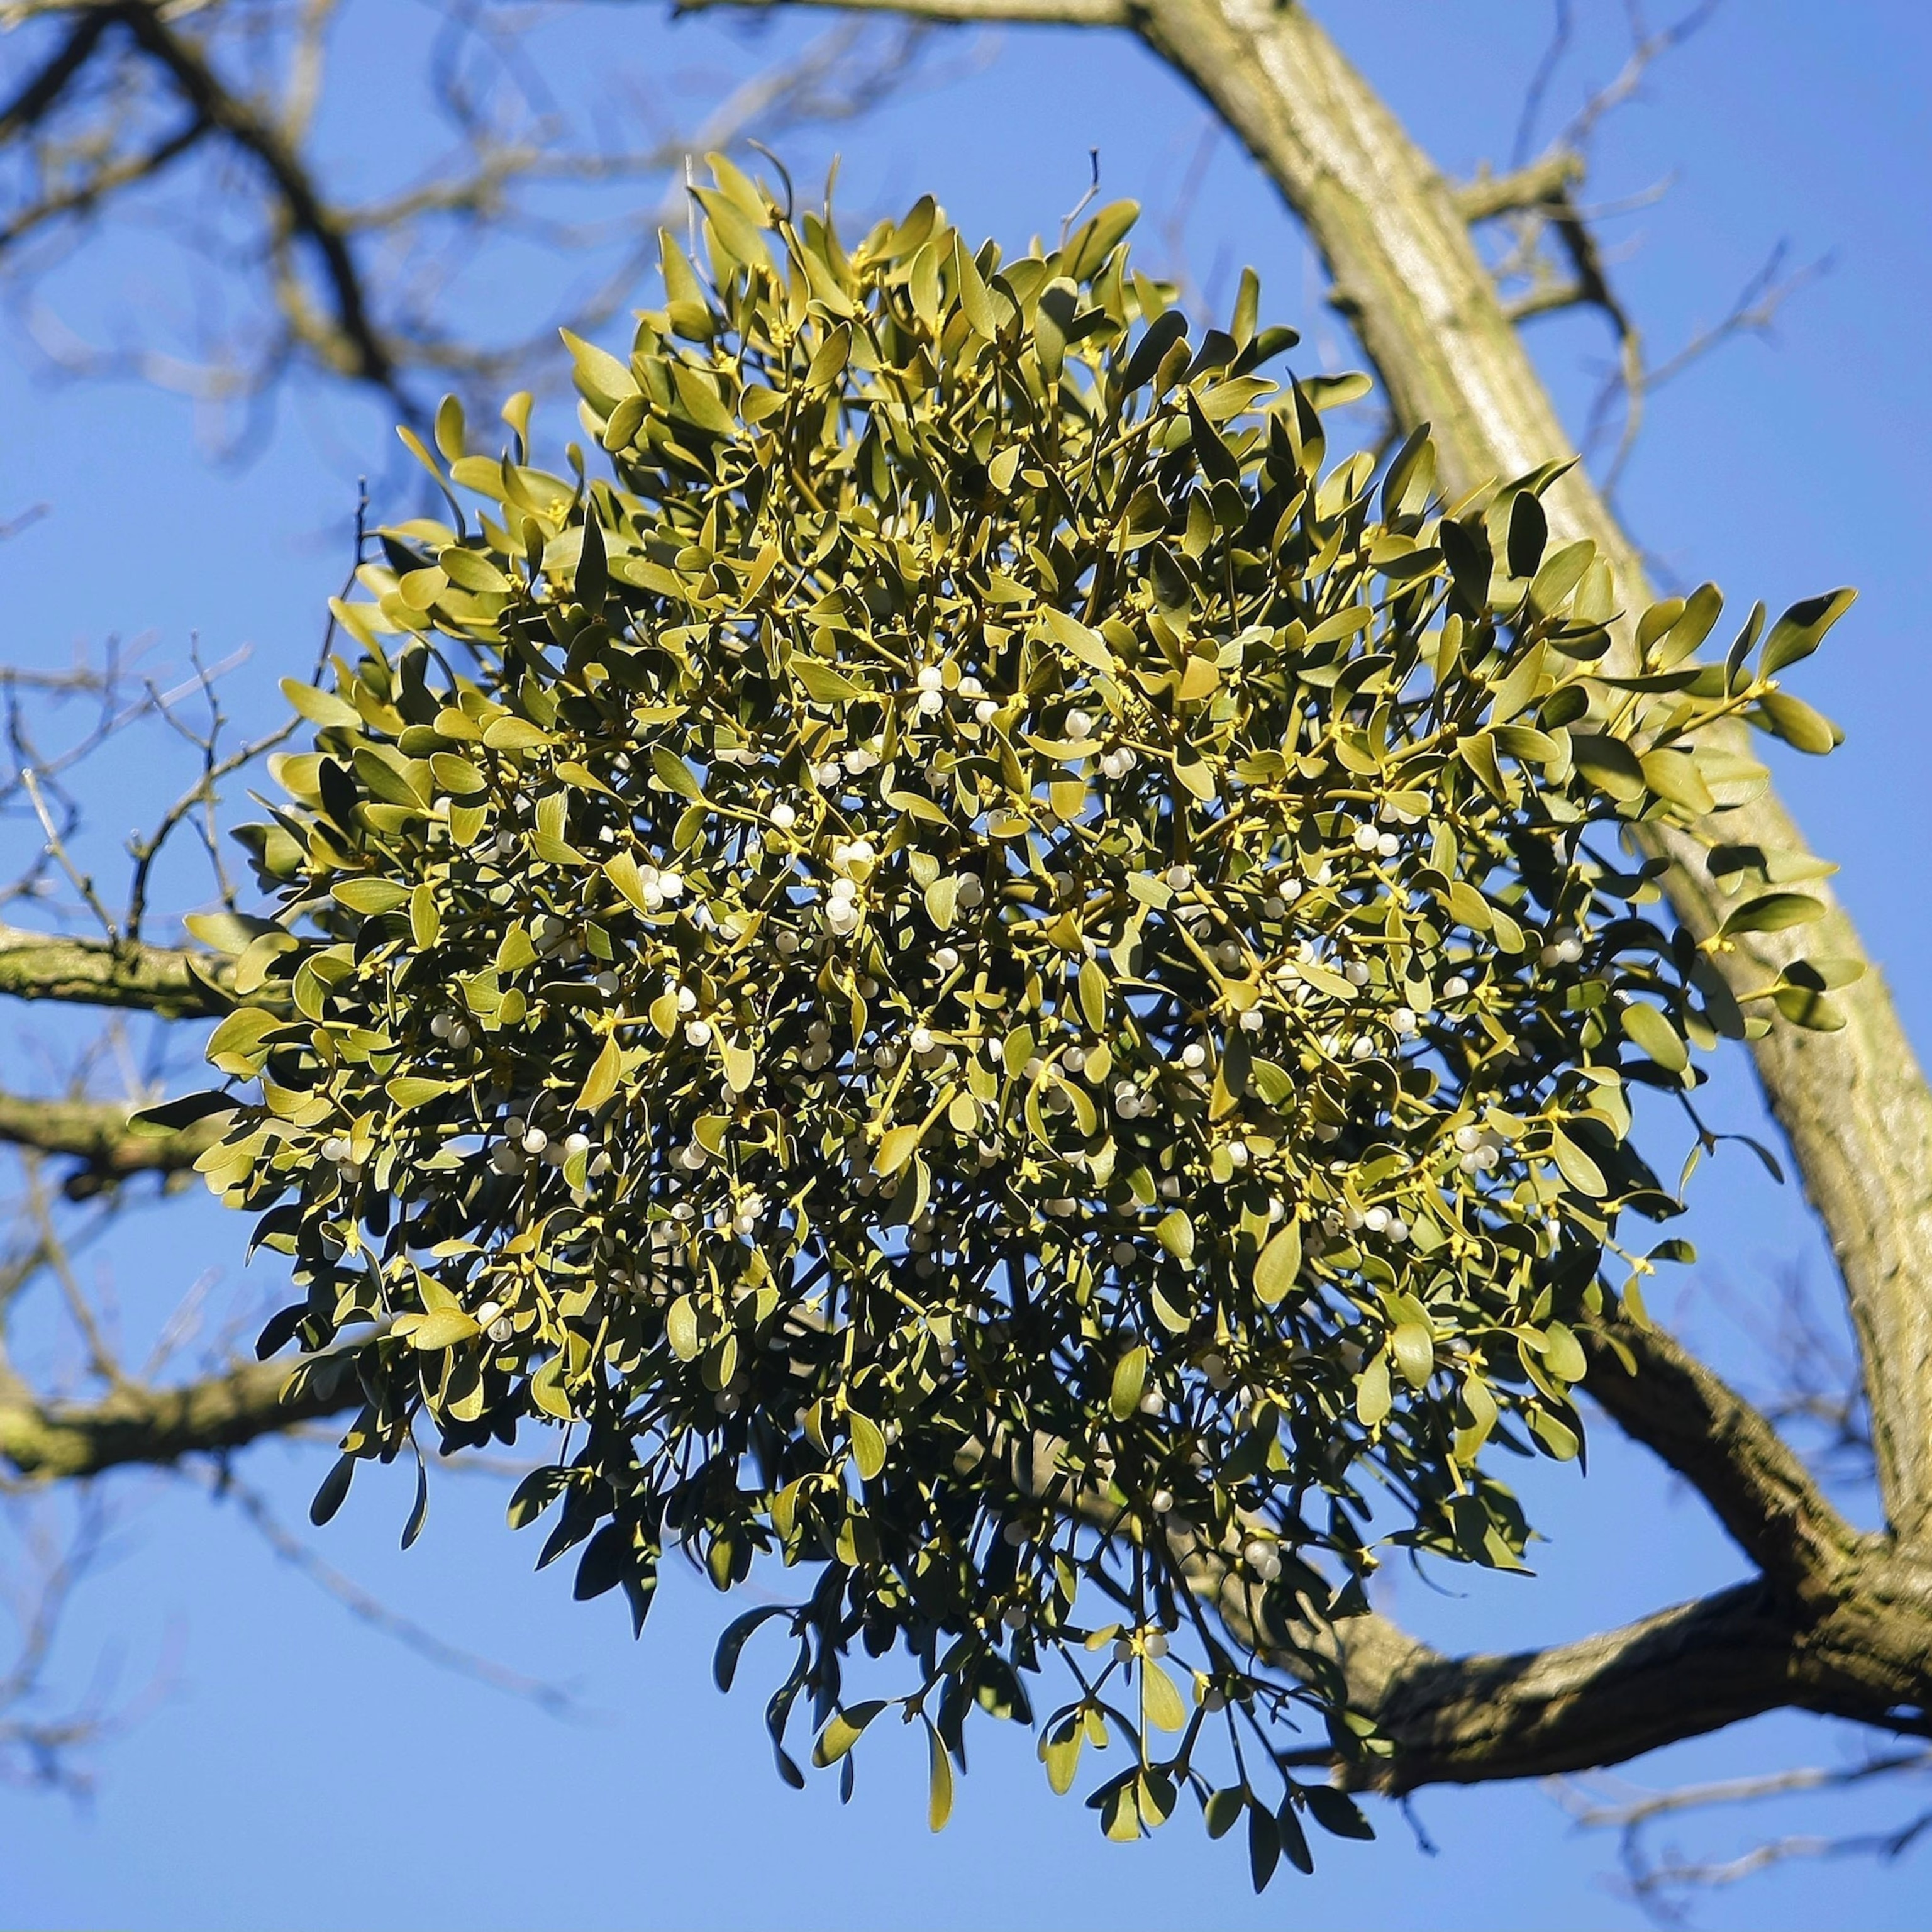 chris gehrig recommends images of mistletoe pic